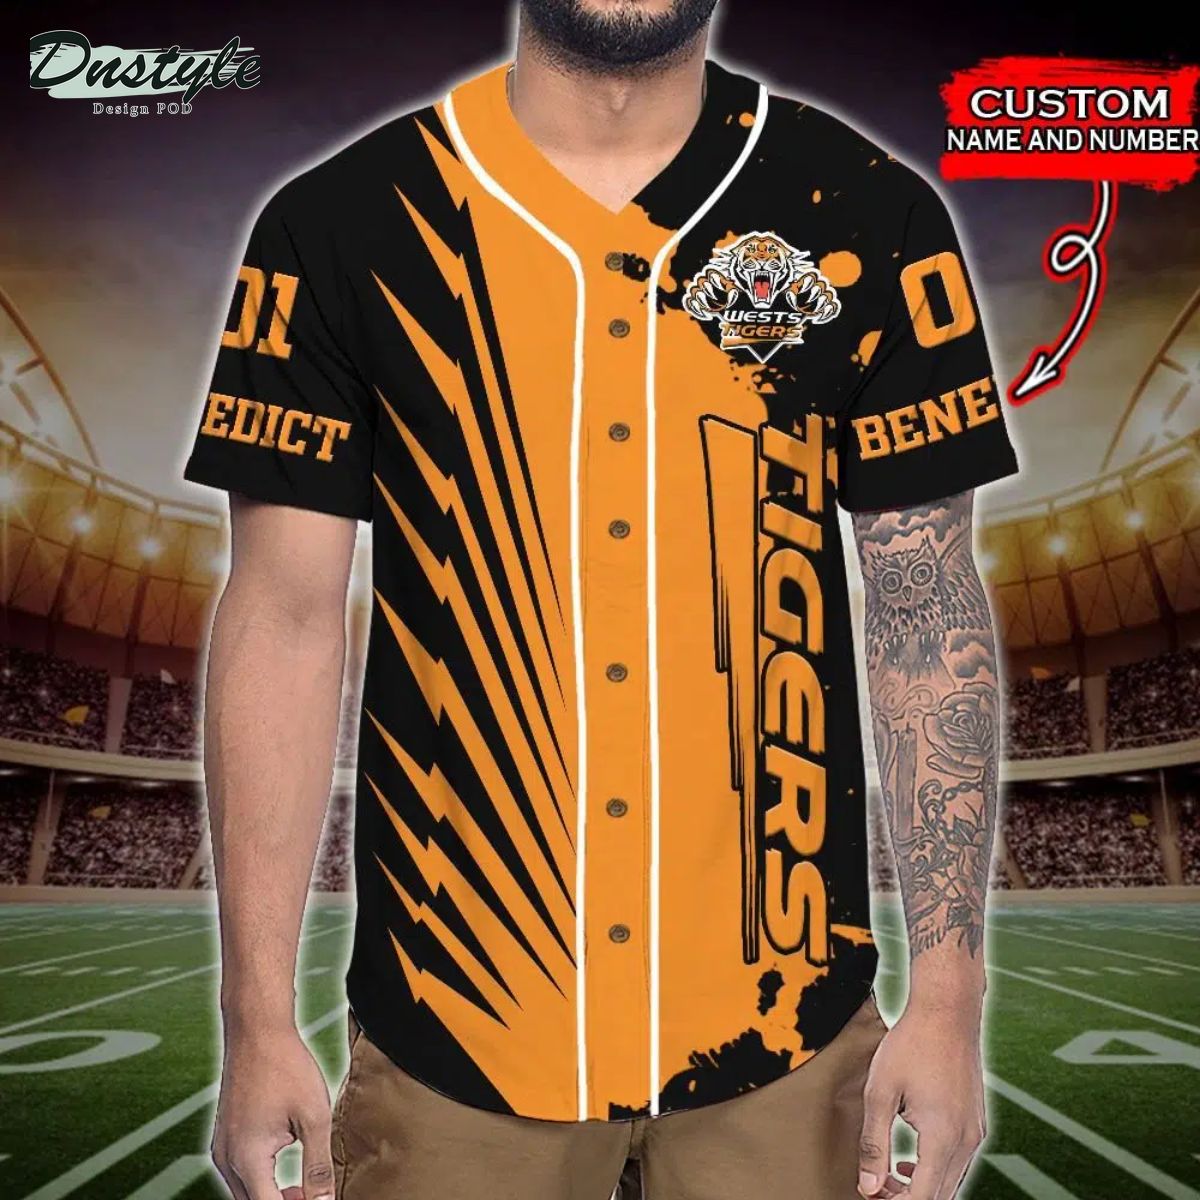 Wests Tigers NRL Custom Name And Number Baseball Jersey